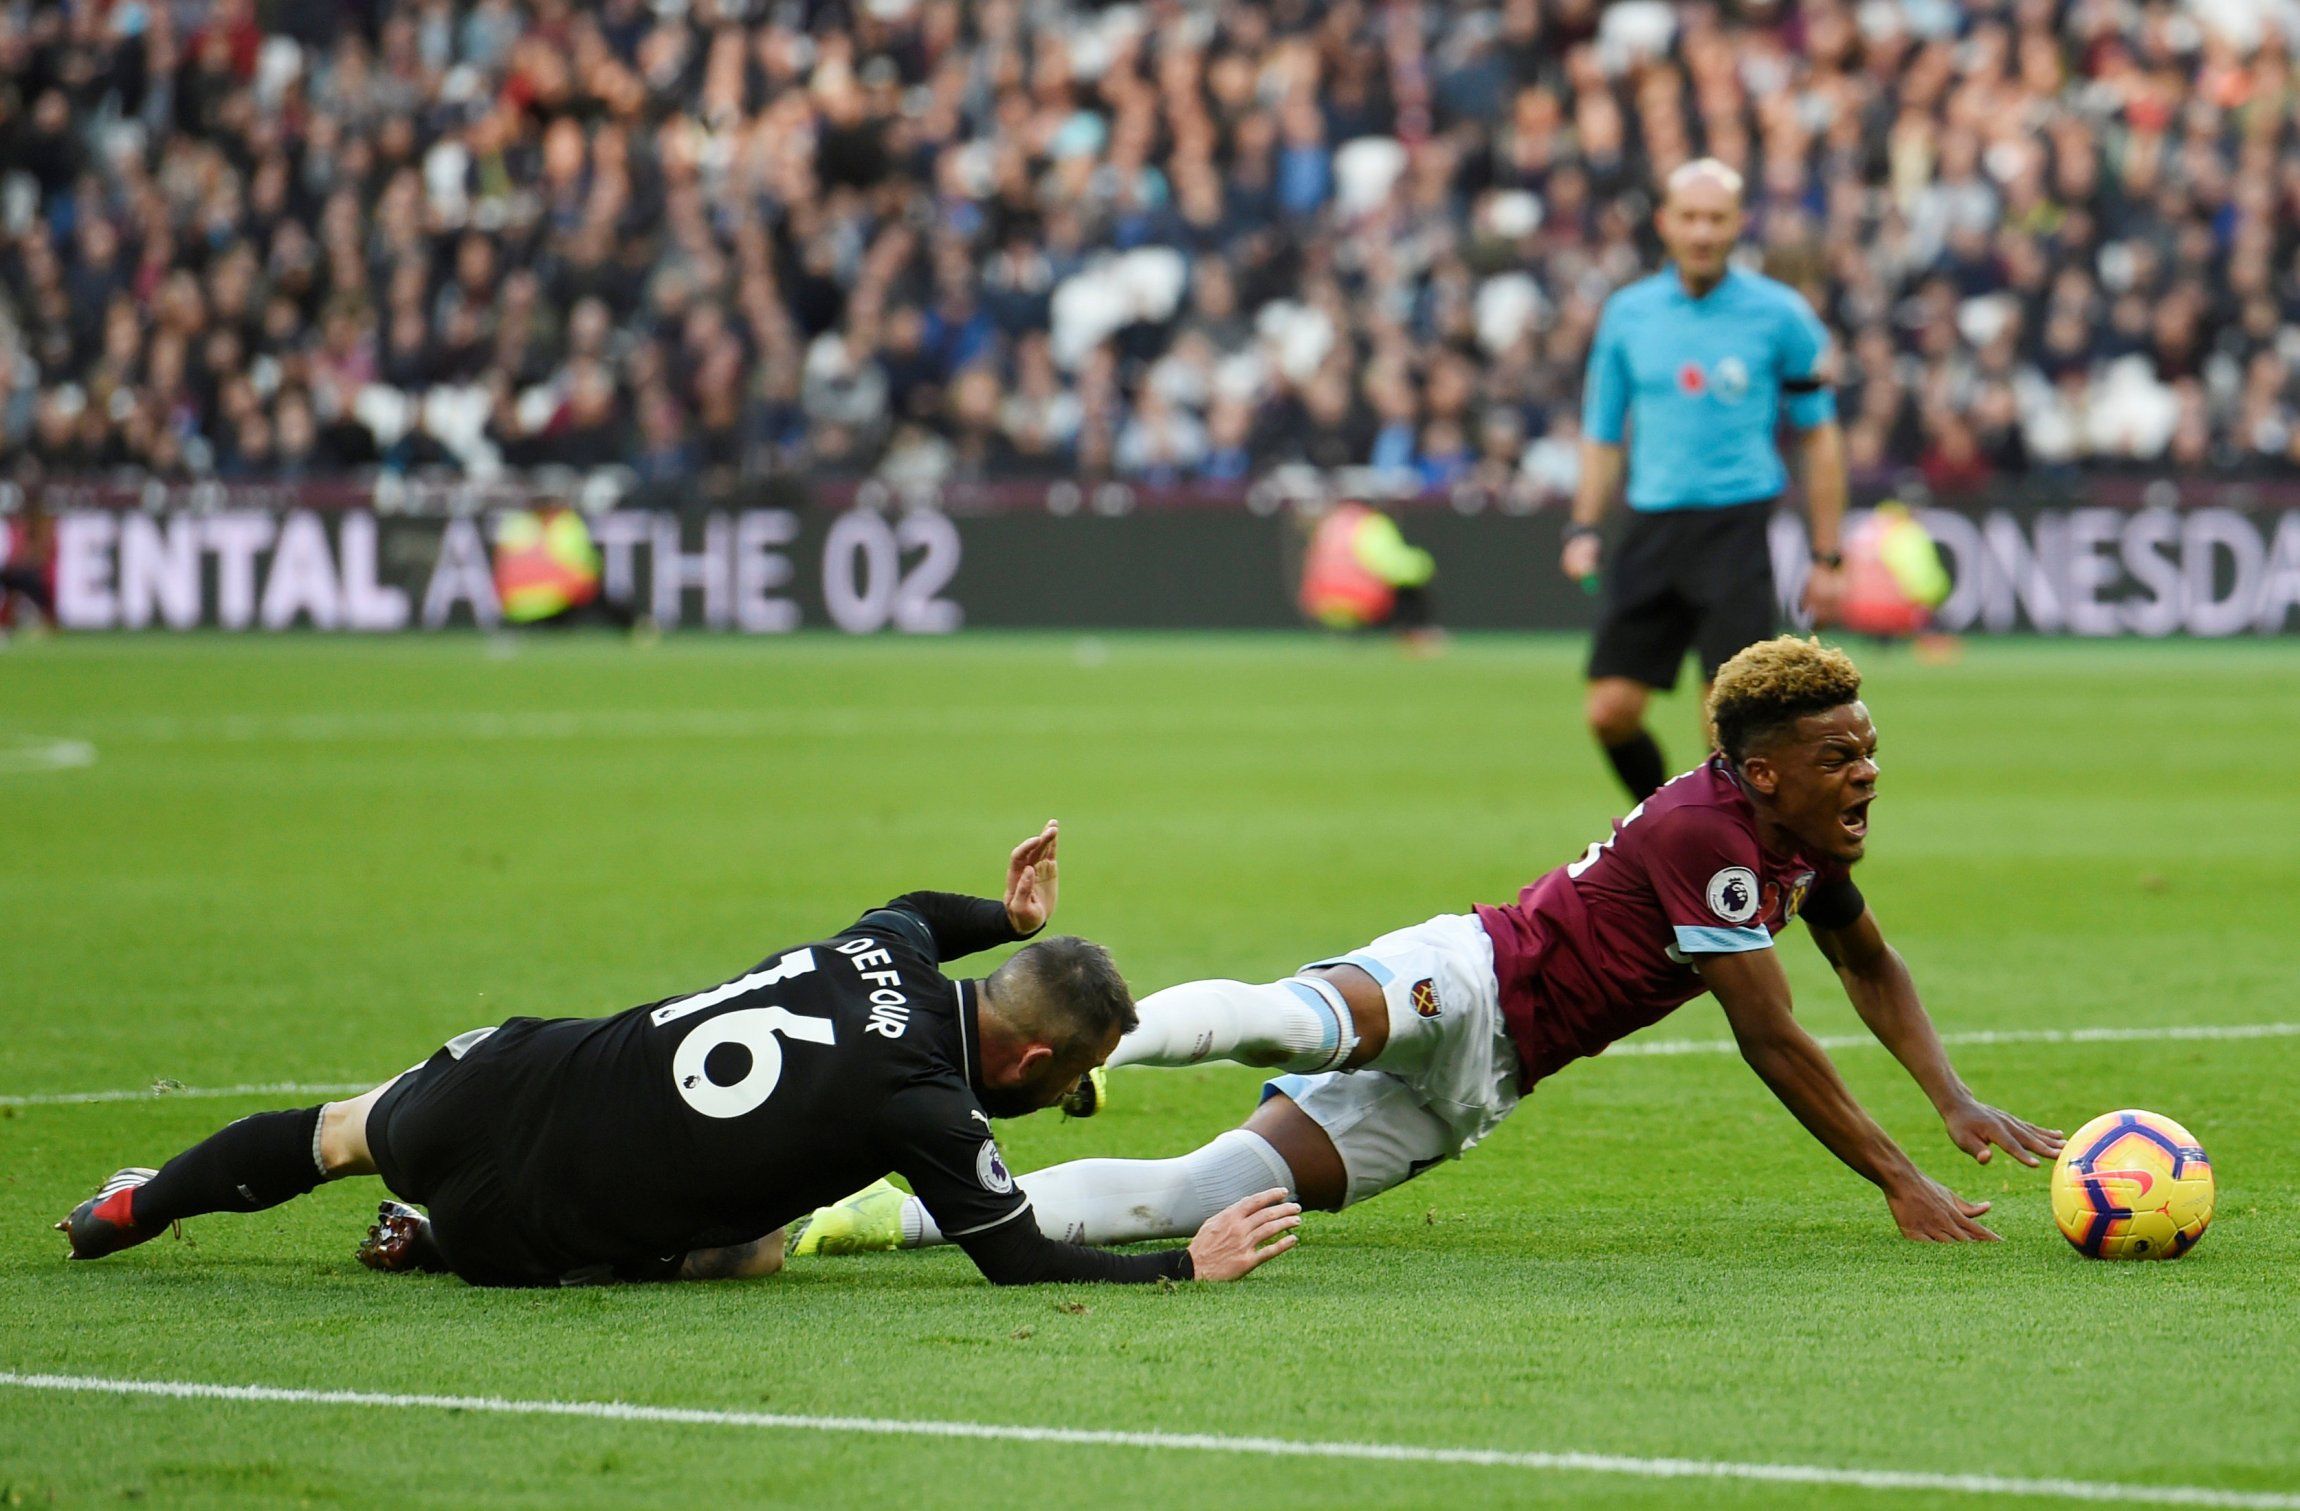 Grady Diangana brought down by Steven Defour v Burnley